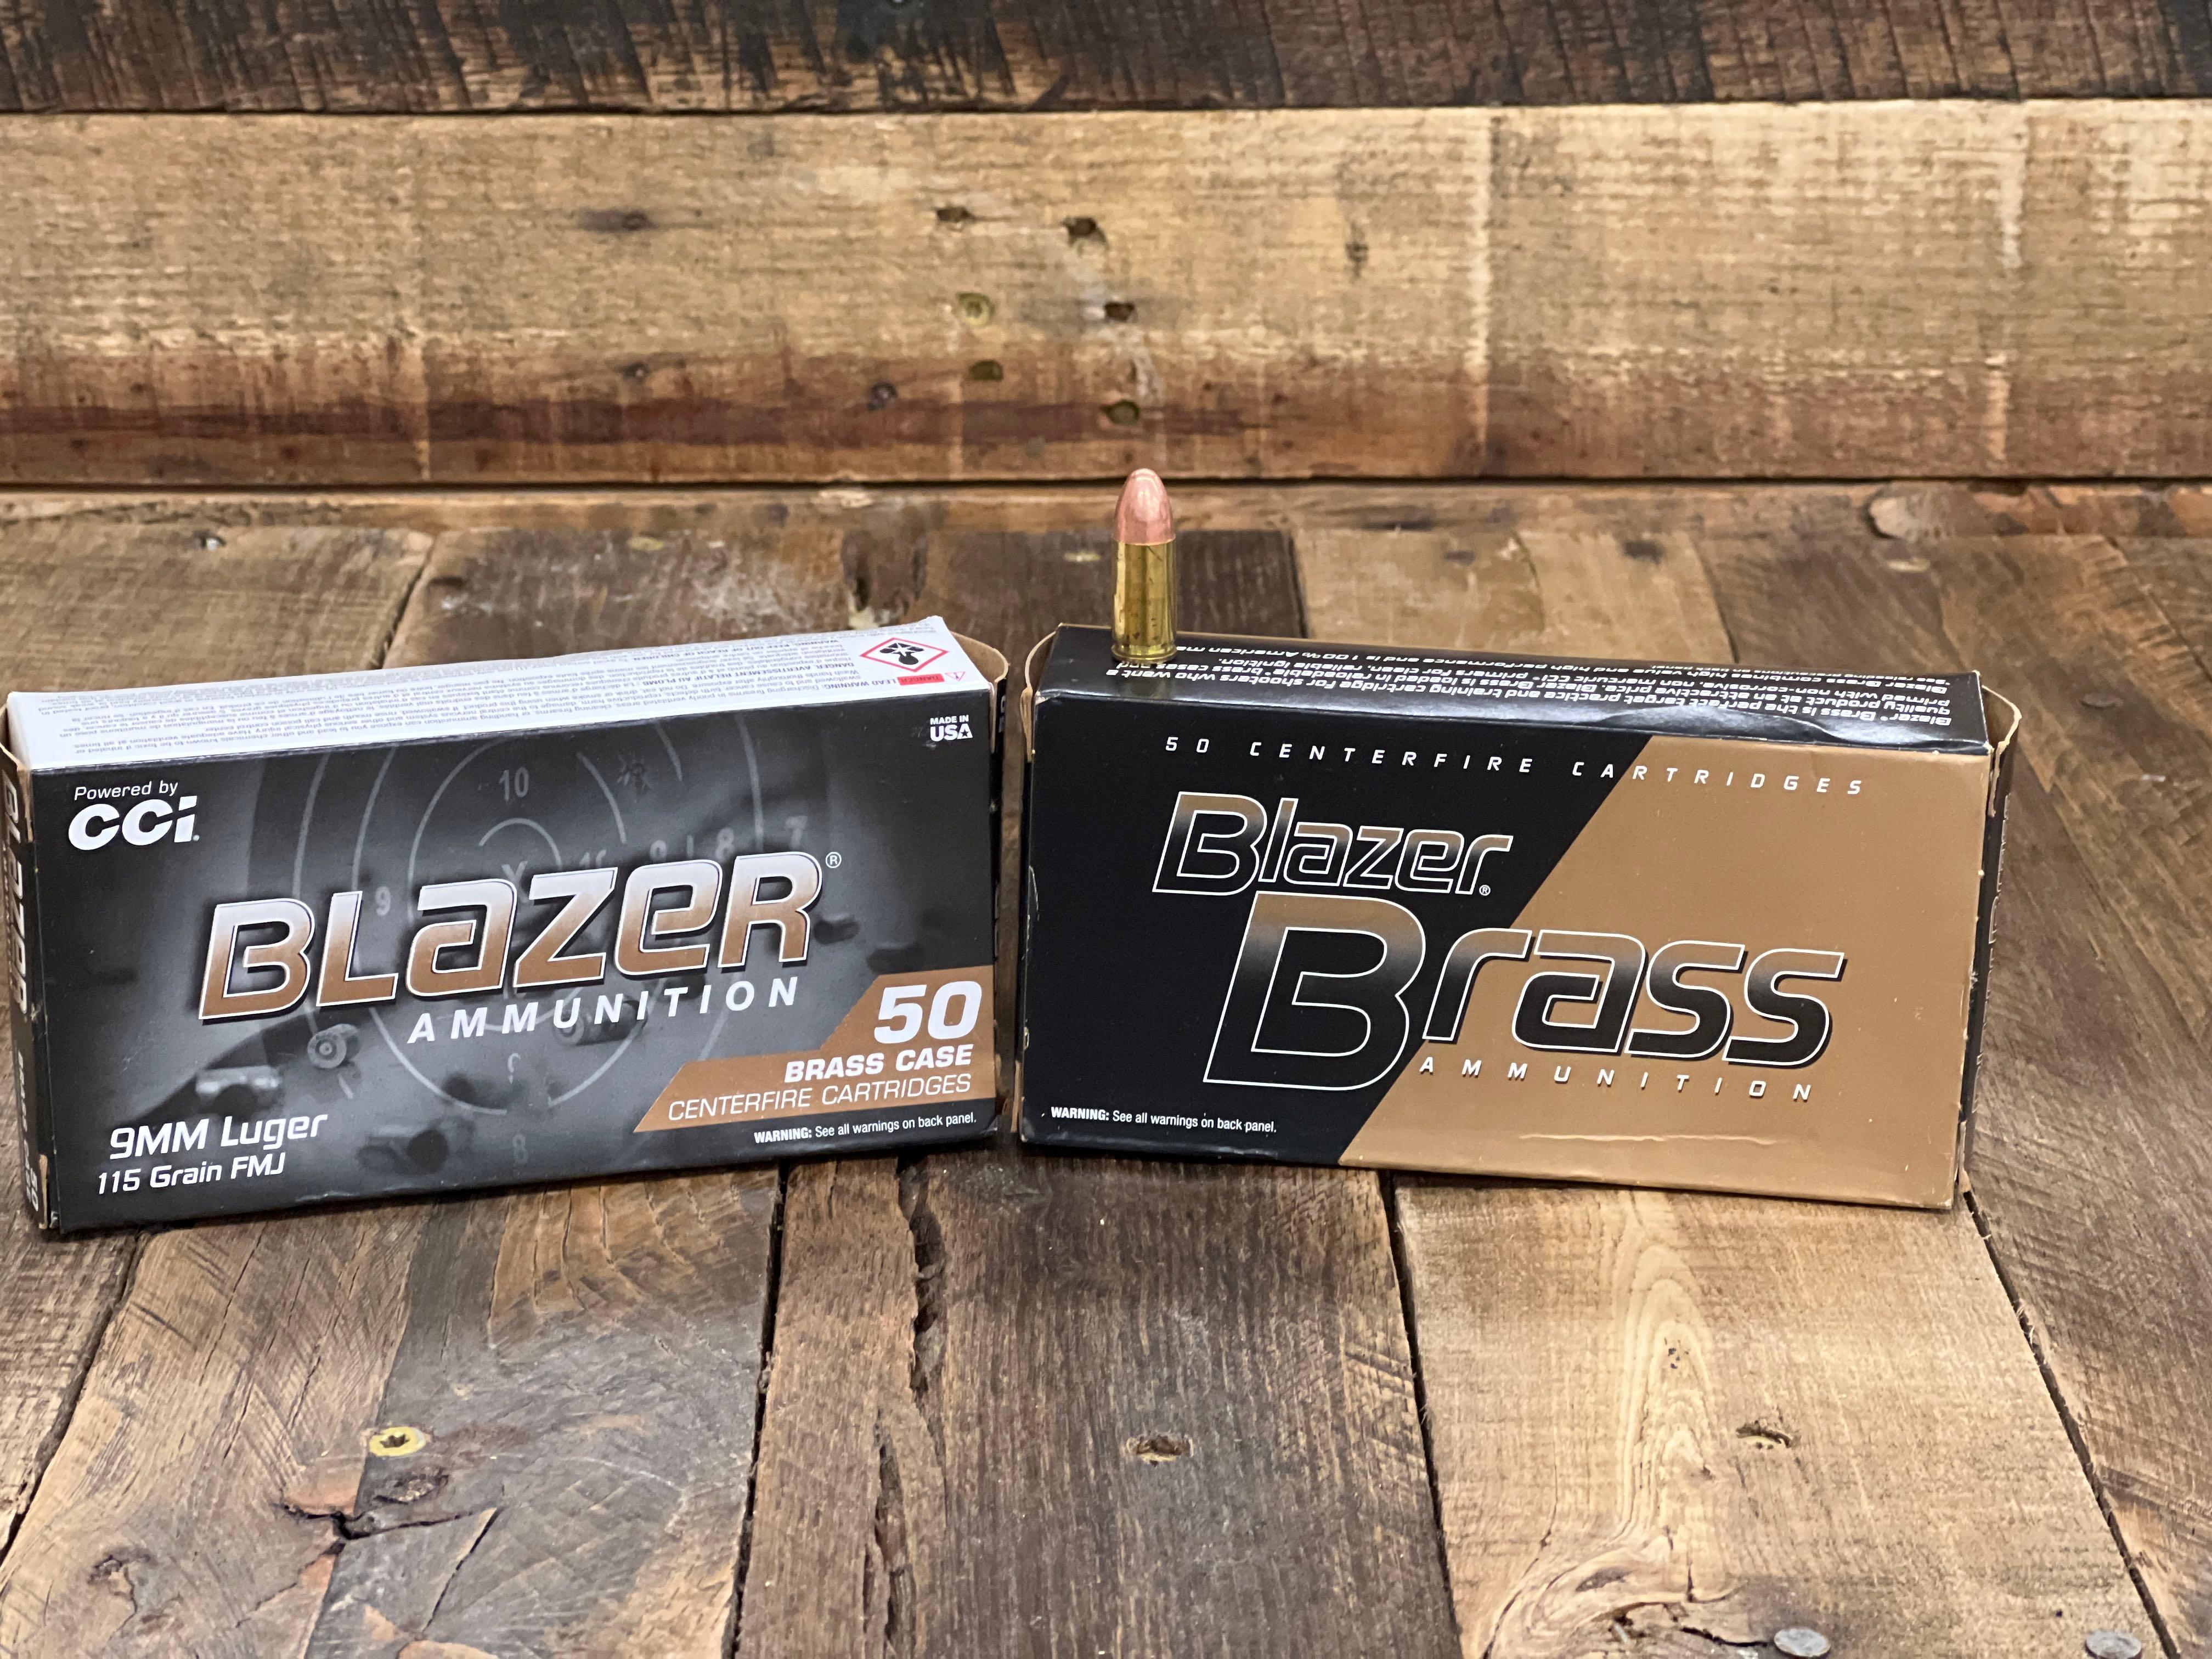 2 BOXES OF BLAZER BRASS 9MM LUGER 115GR FMJ AMMO 50